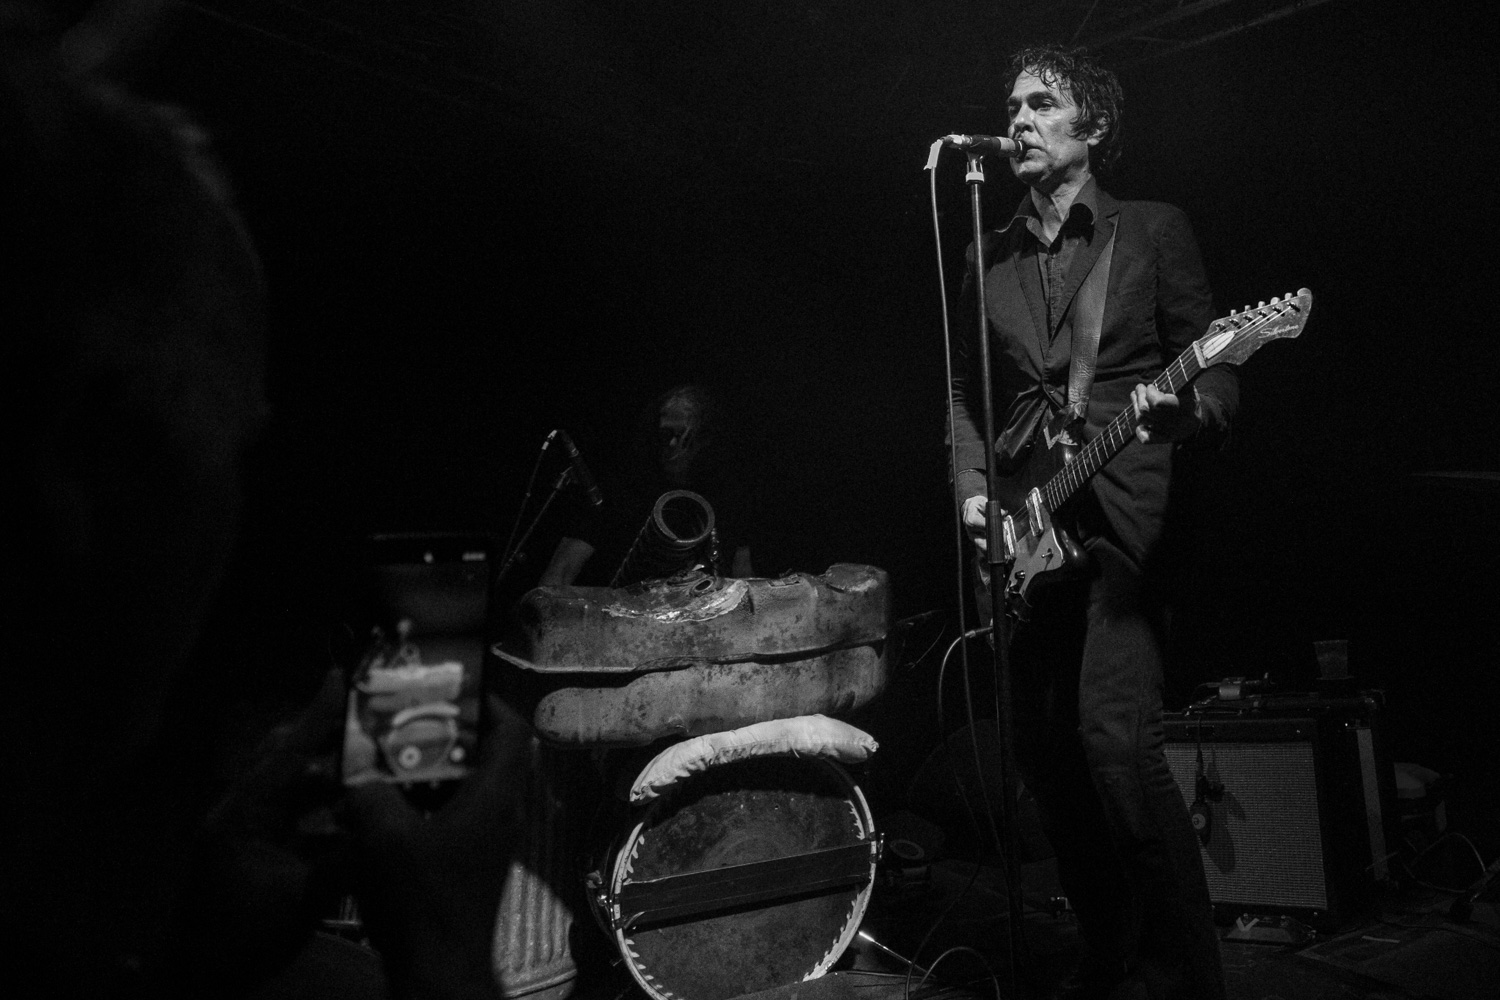 JON SPENCER AND THE HITMAKERS